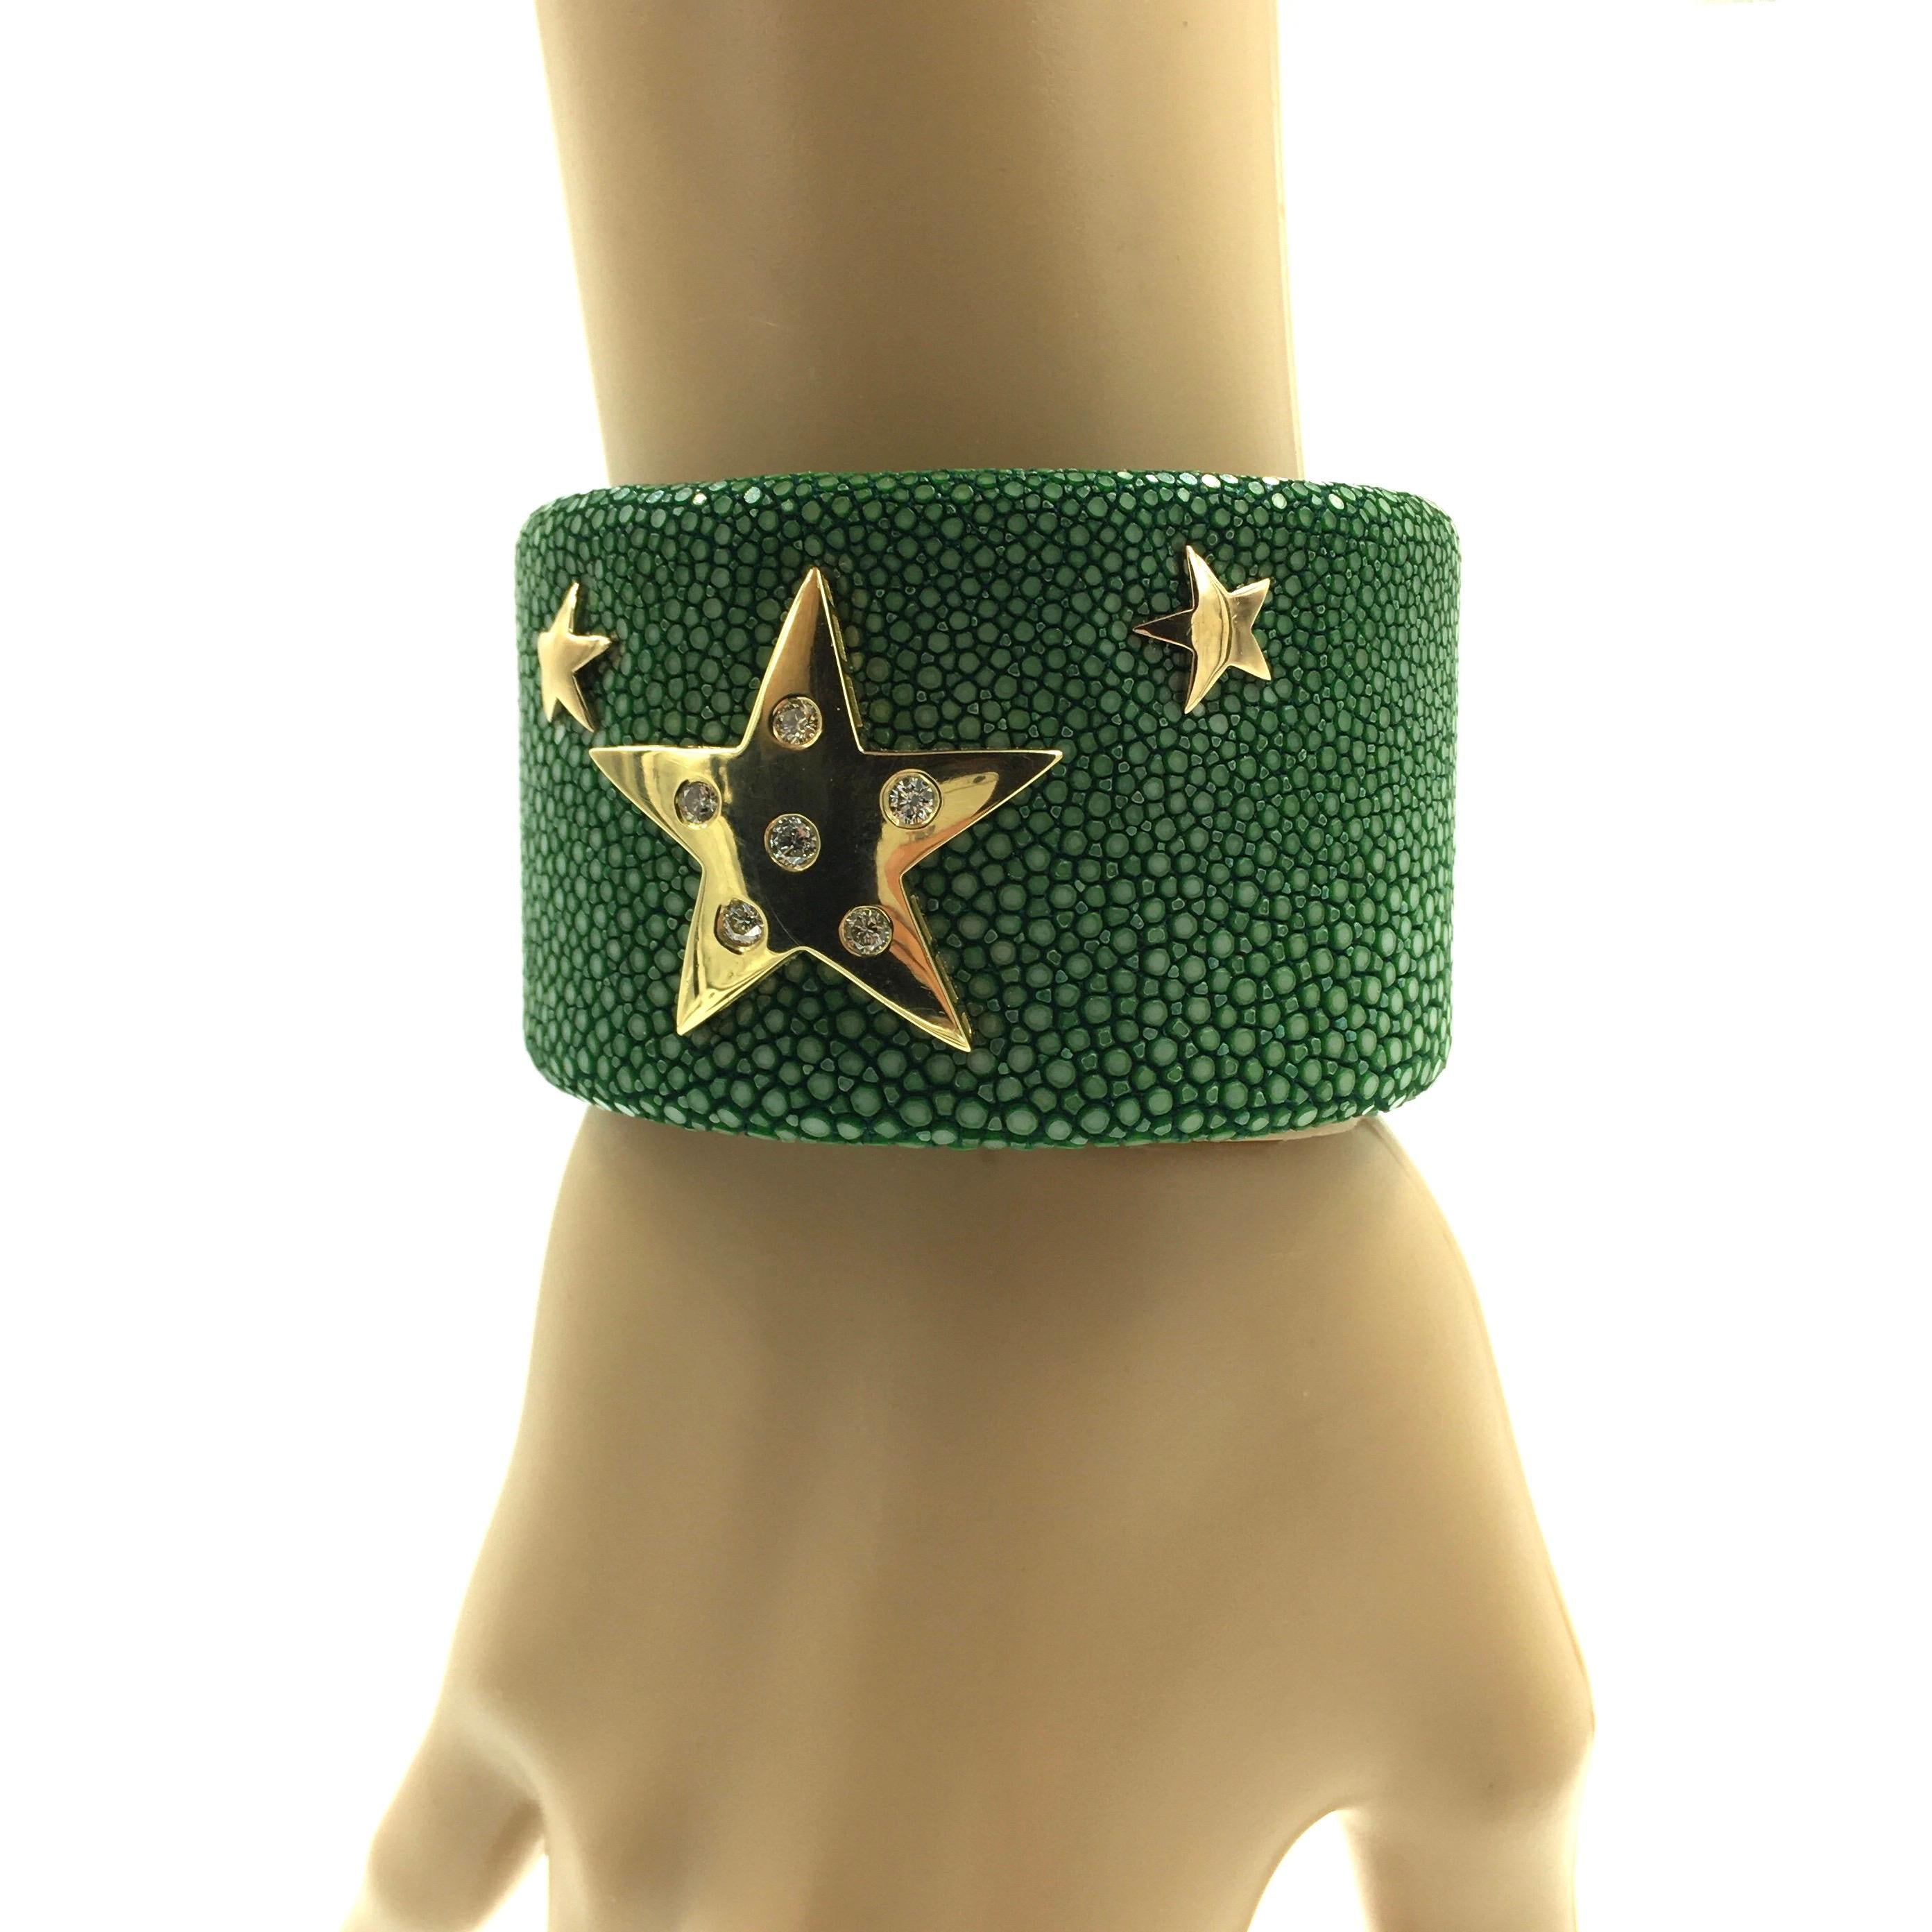 A 40mm wide forest green color shagreen covered cuff, set with a five-point 14 karat yellow gold star, which has been set with six round brilliant cut diamonds, and set with two small five-point 14 karat yellow gold stars.